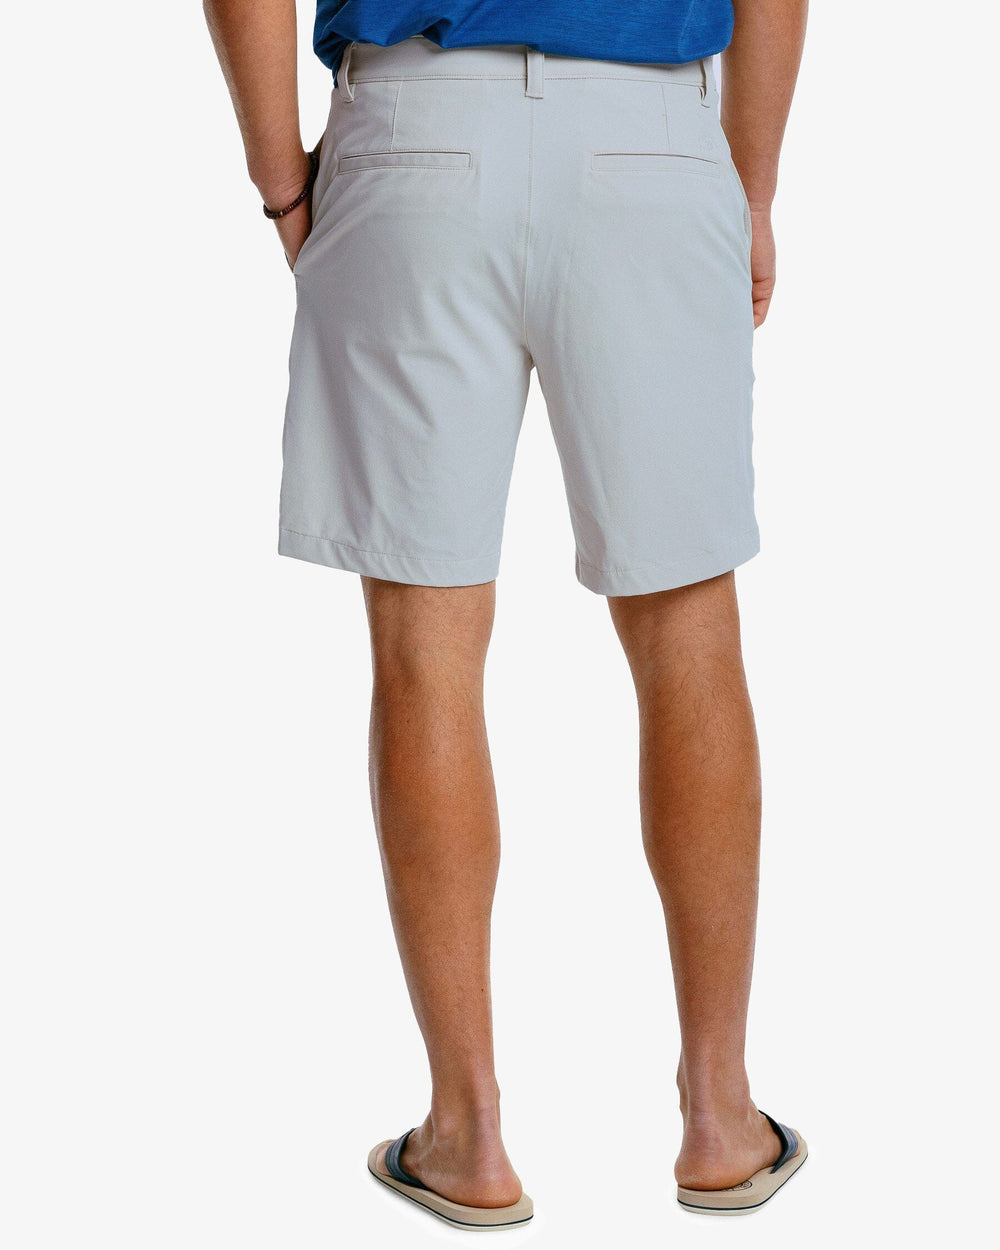 The back of the Men's Gulf 8 Inch Brrr Performance Short by Southern Tide - Seagull Grey